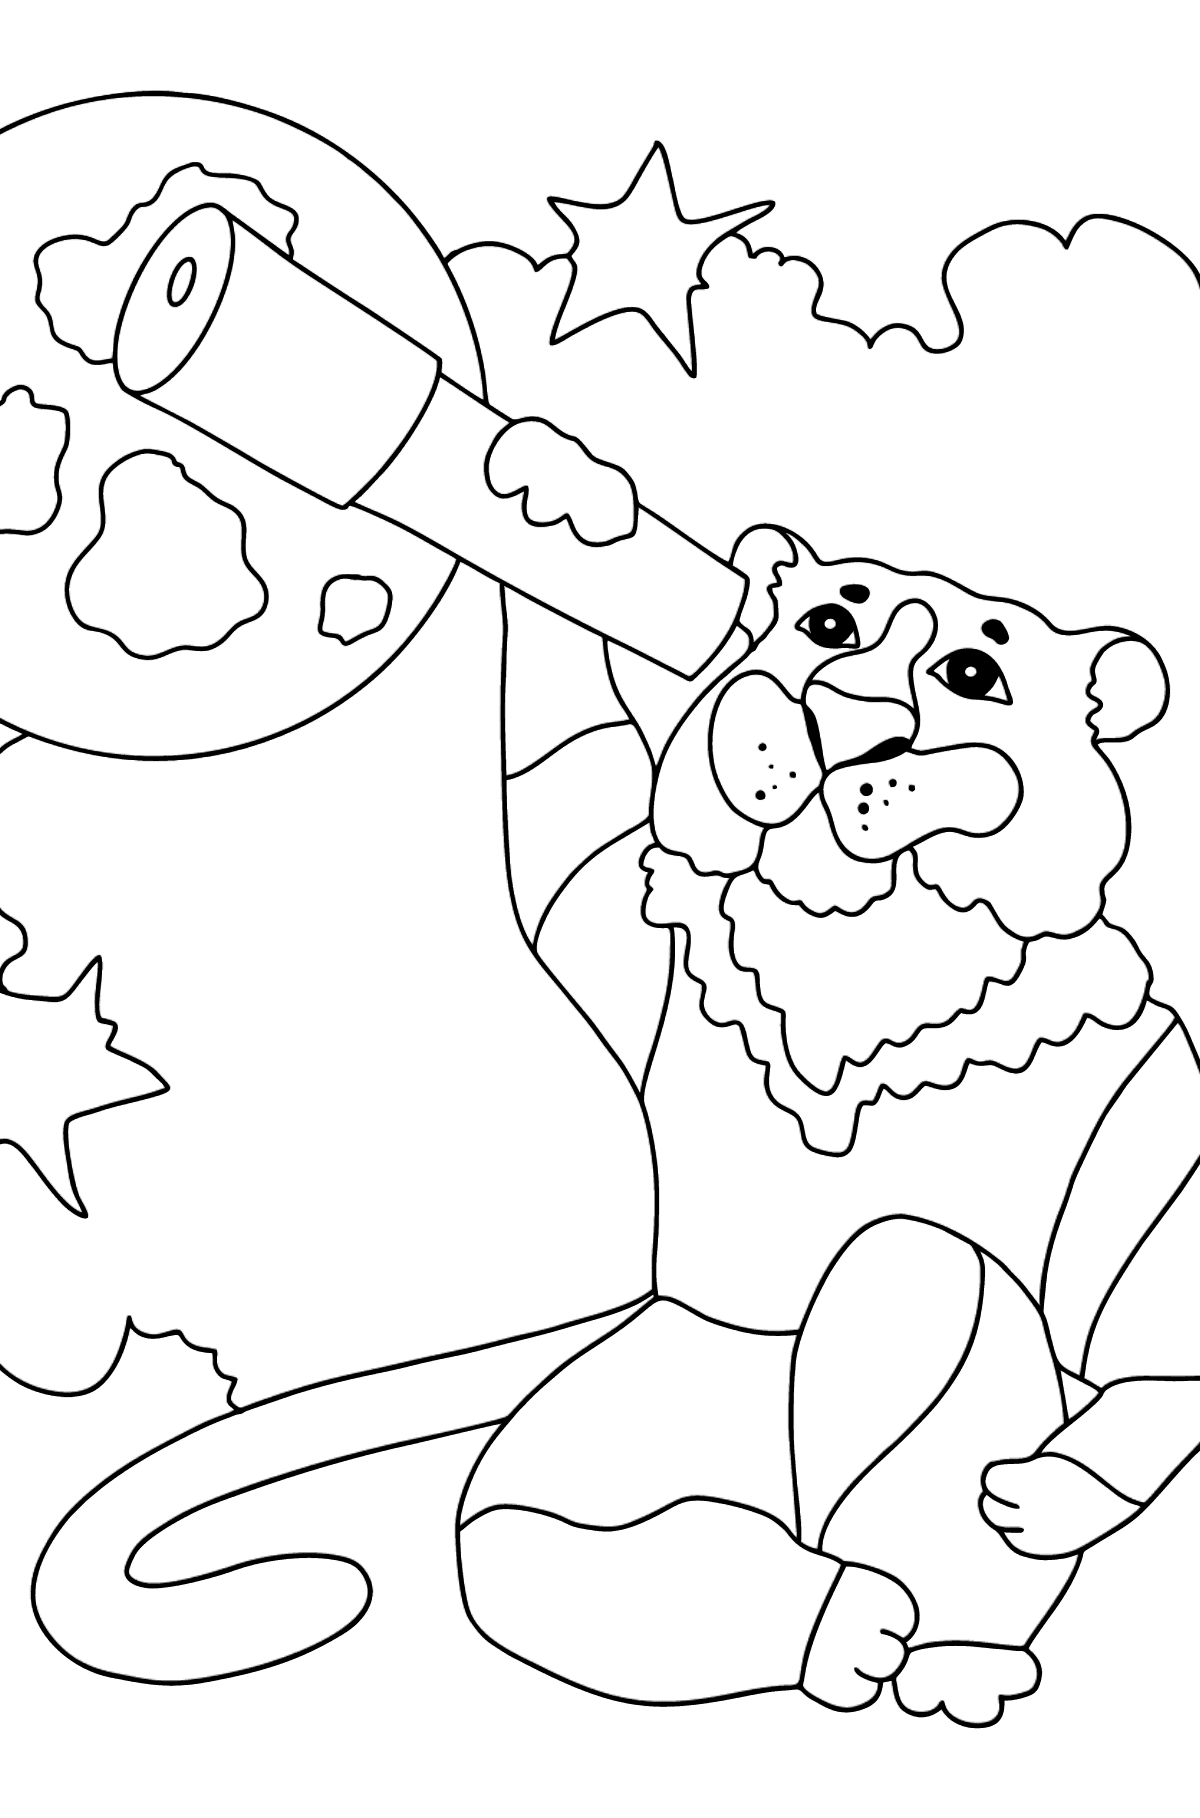 Coloring Page - A Tiger is Looking Through a Telescope - Coloring Pages for Kids